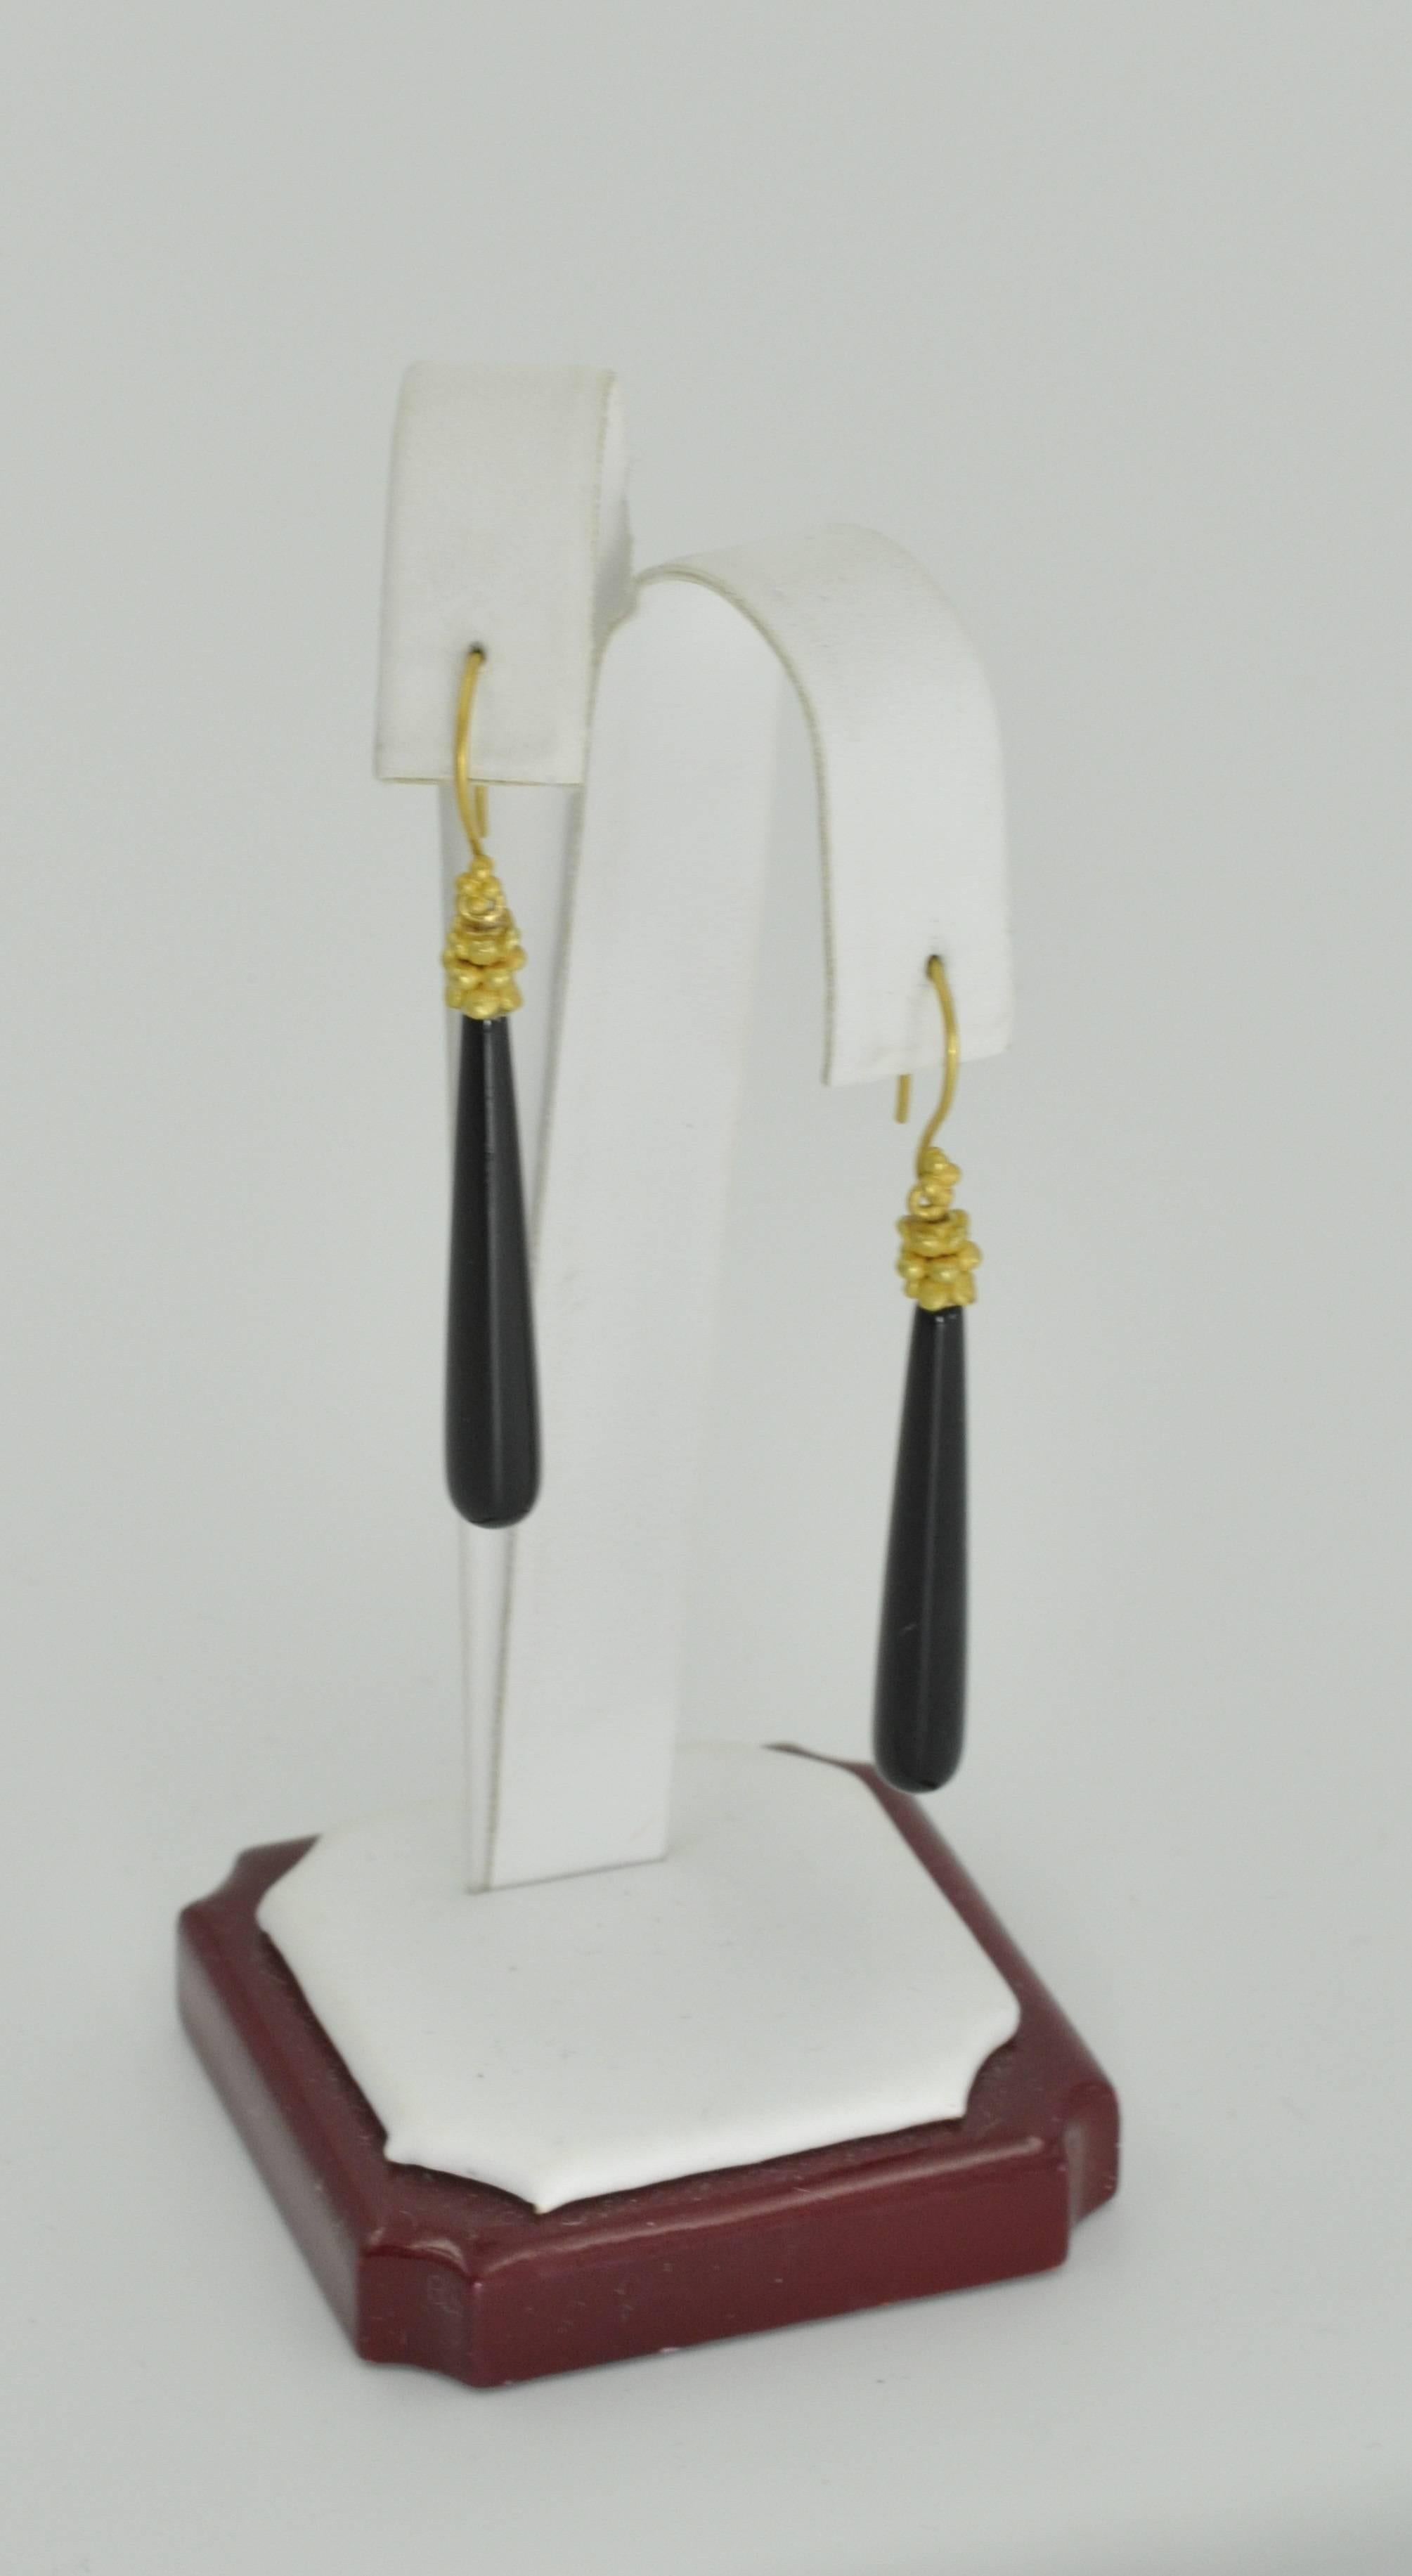 These gorgeous, delicate dangle Black Onyx drops are created by renowned designer Carolyn Tyler. The earrings are made of 22k yellow gold and 18.5ct Black Onyx Agate with dainty ear hooks.